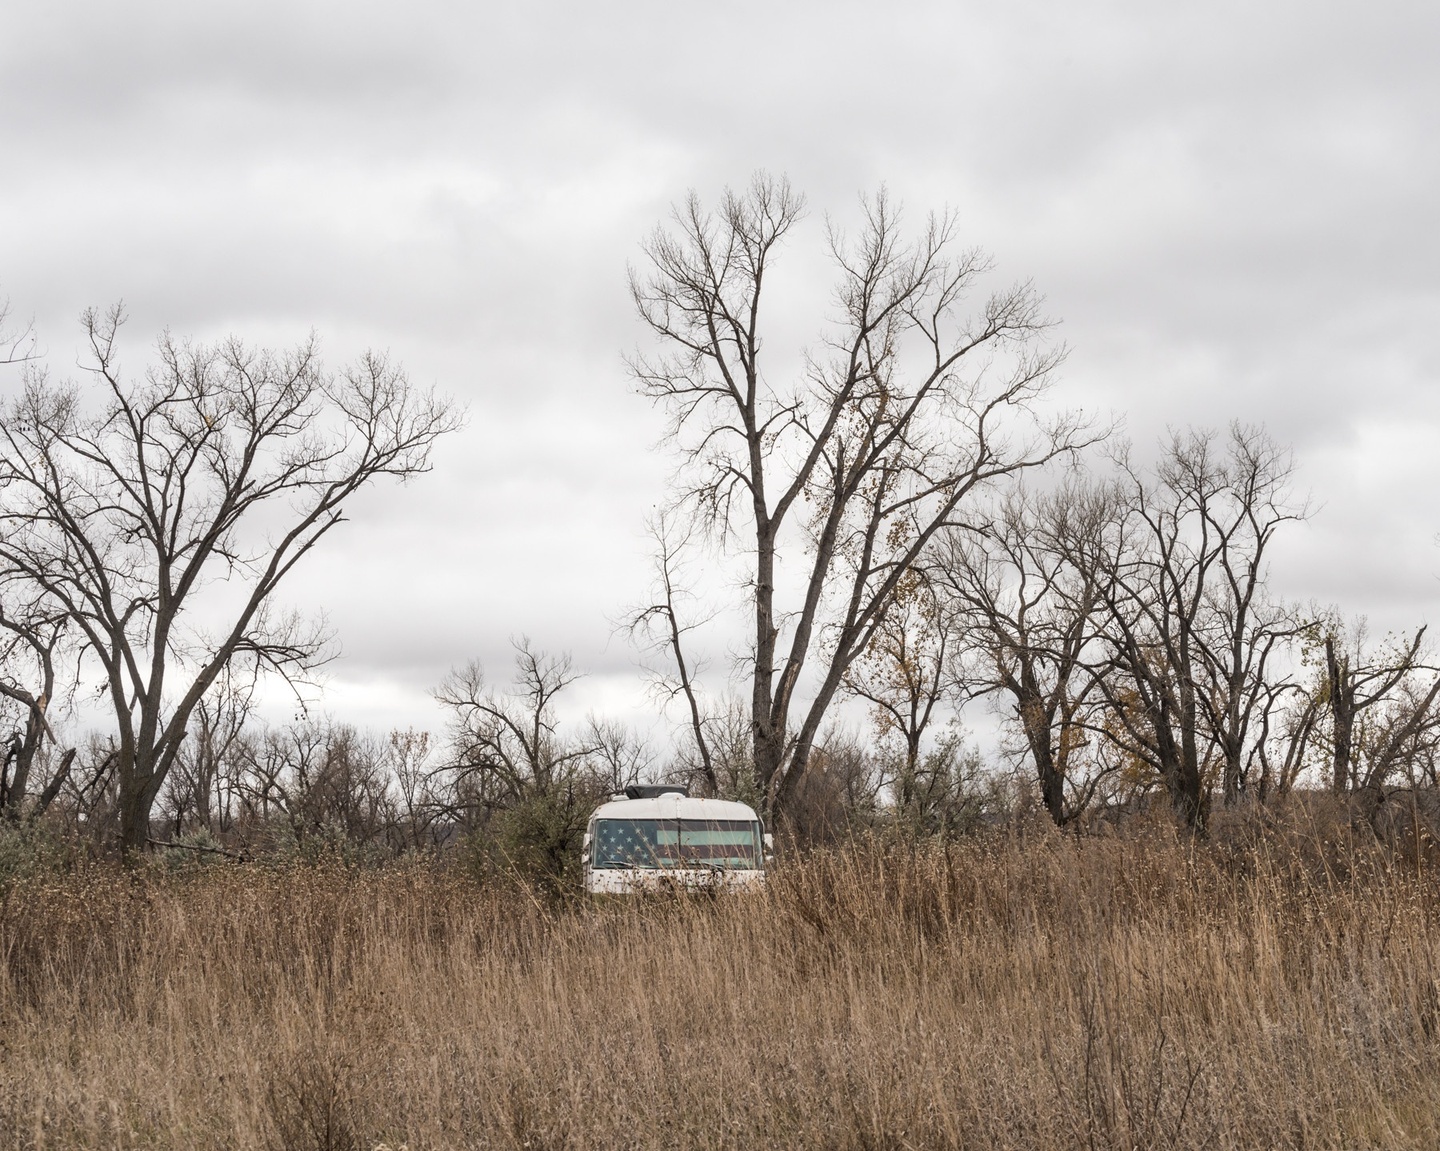 A van partially obscured by the tall weeds/grass in the foreground; beyond it, bare trees against an overcast sky.